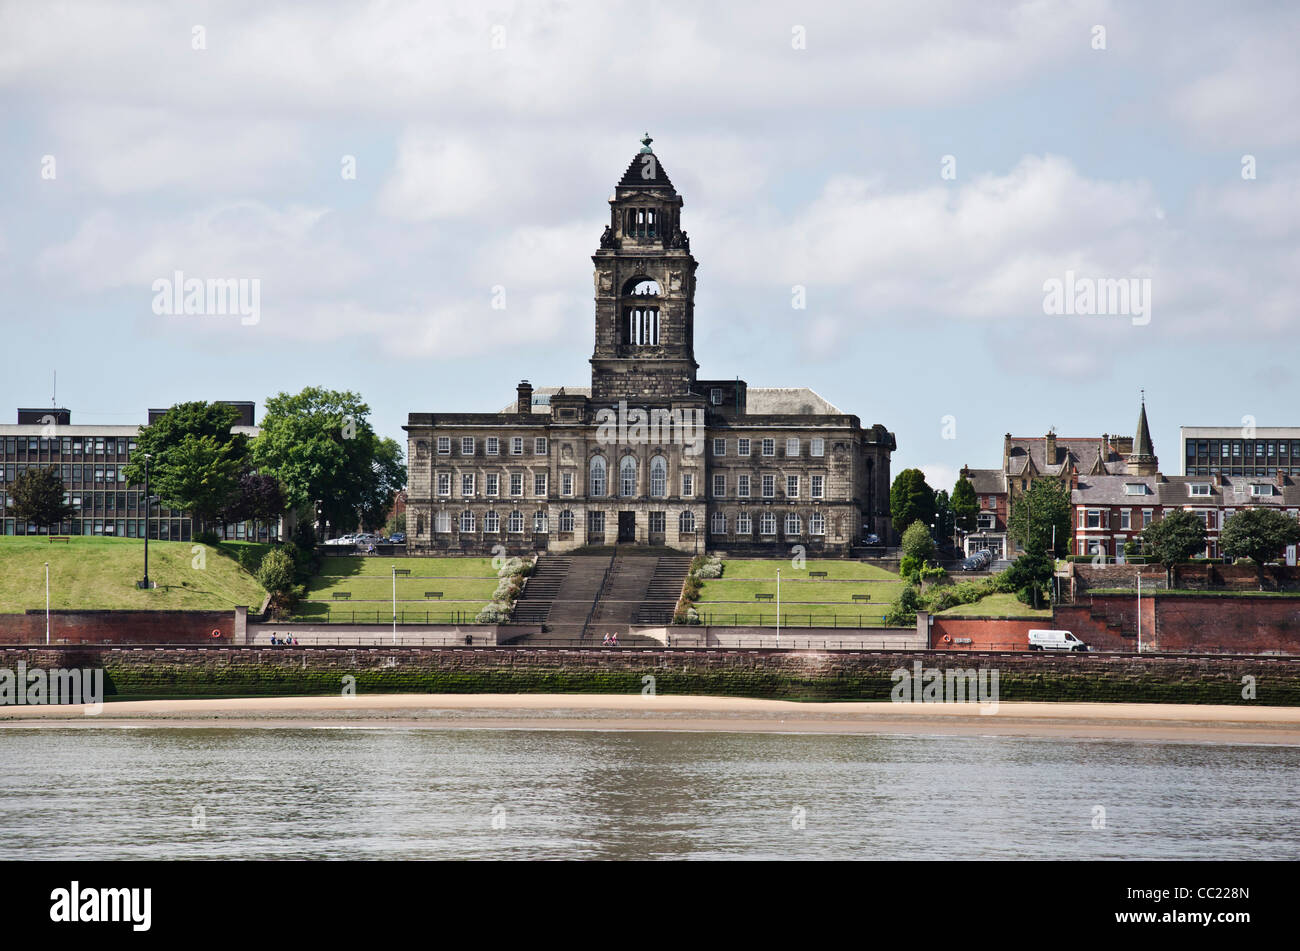 Wallasey Town Hall on the south bank of the River Mersey, The Wirral, England. Stock Photo